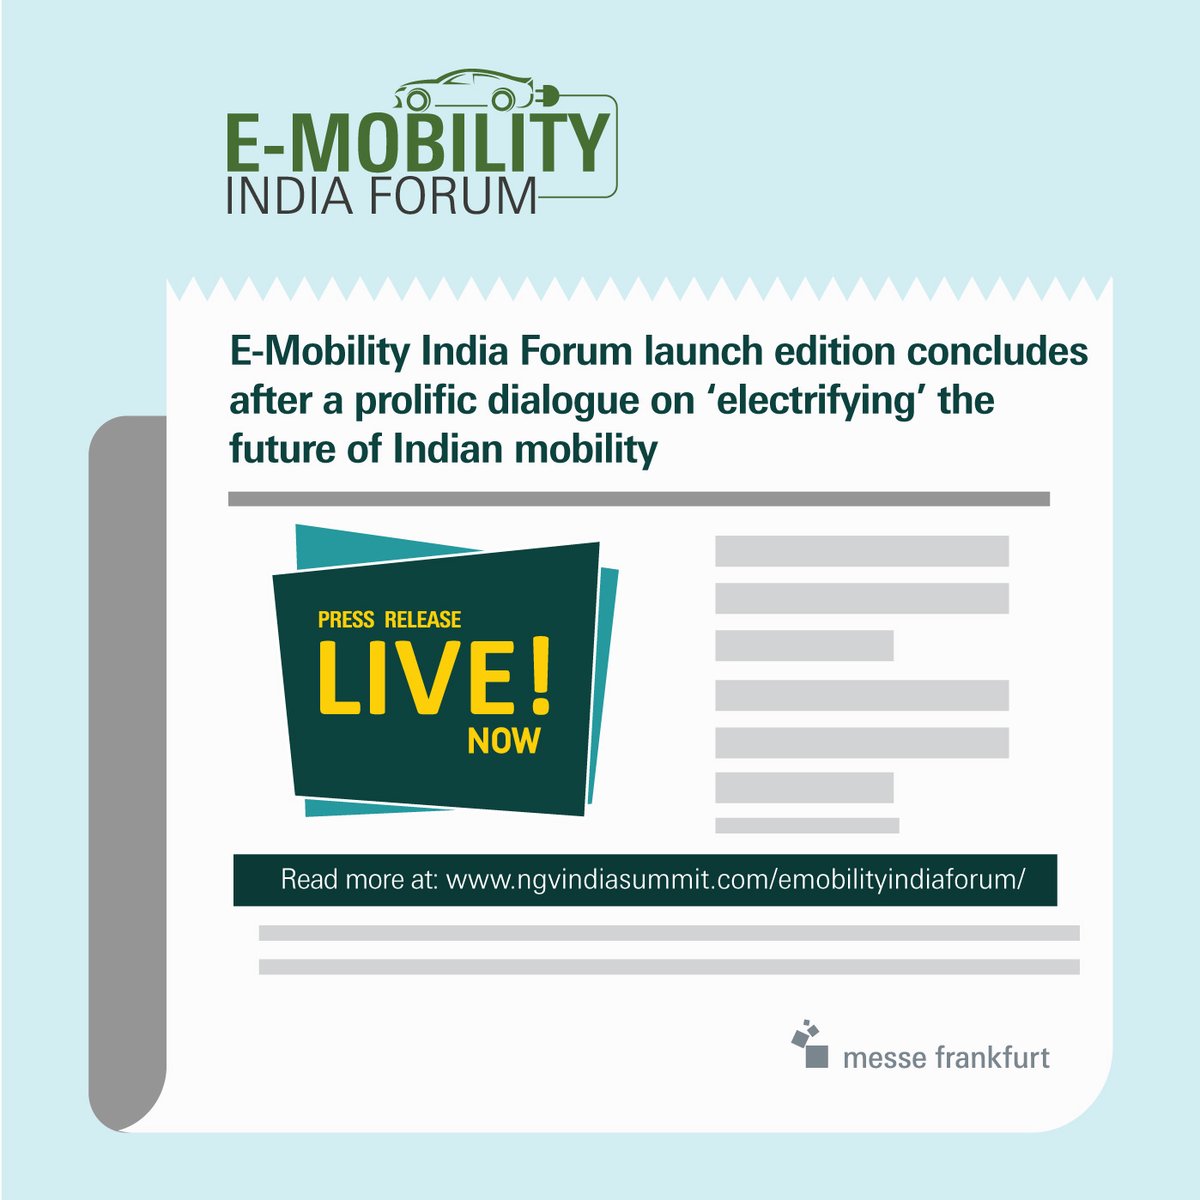 The launch edition of @EmobilityF , powered by @NgvSummit ,succeeded in bringing the industry face-to-face to discuss the way forward for EVs, on 7th October in New Delhi.
For detailed insights, check out the press release: ngvindiasummit.com/emobilityindia… 
#emobilityindiaforum #emobility